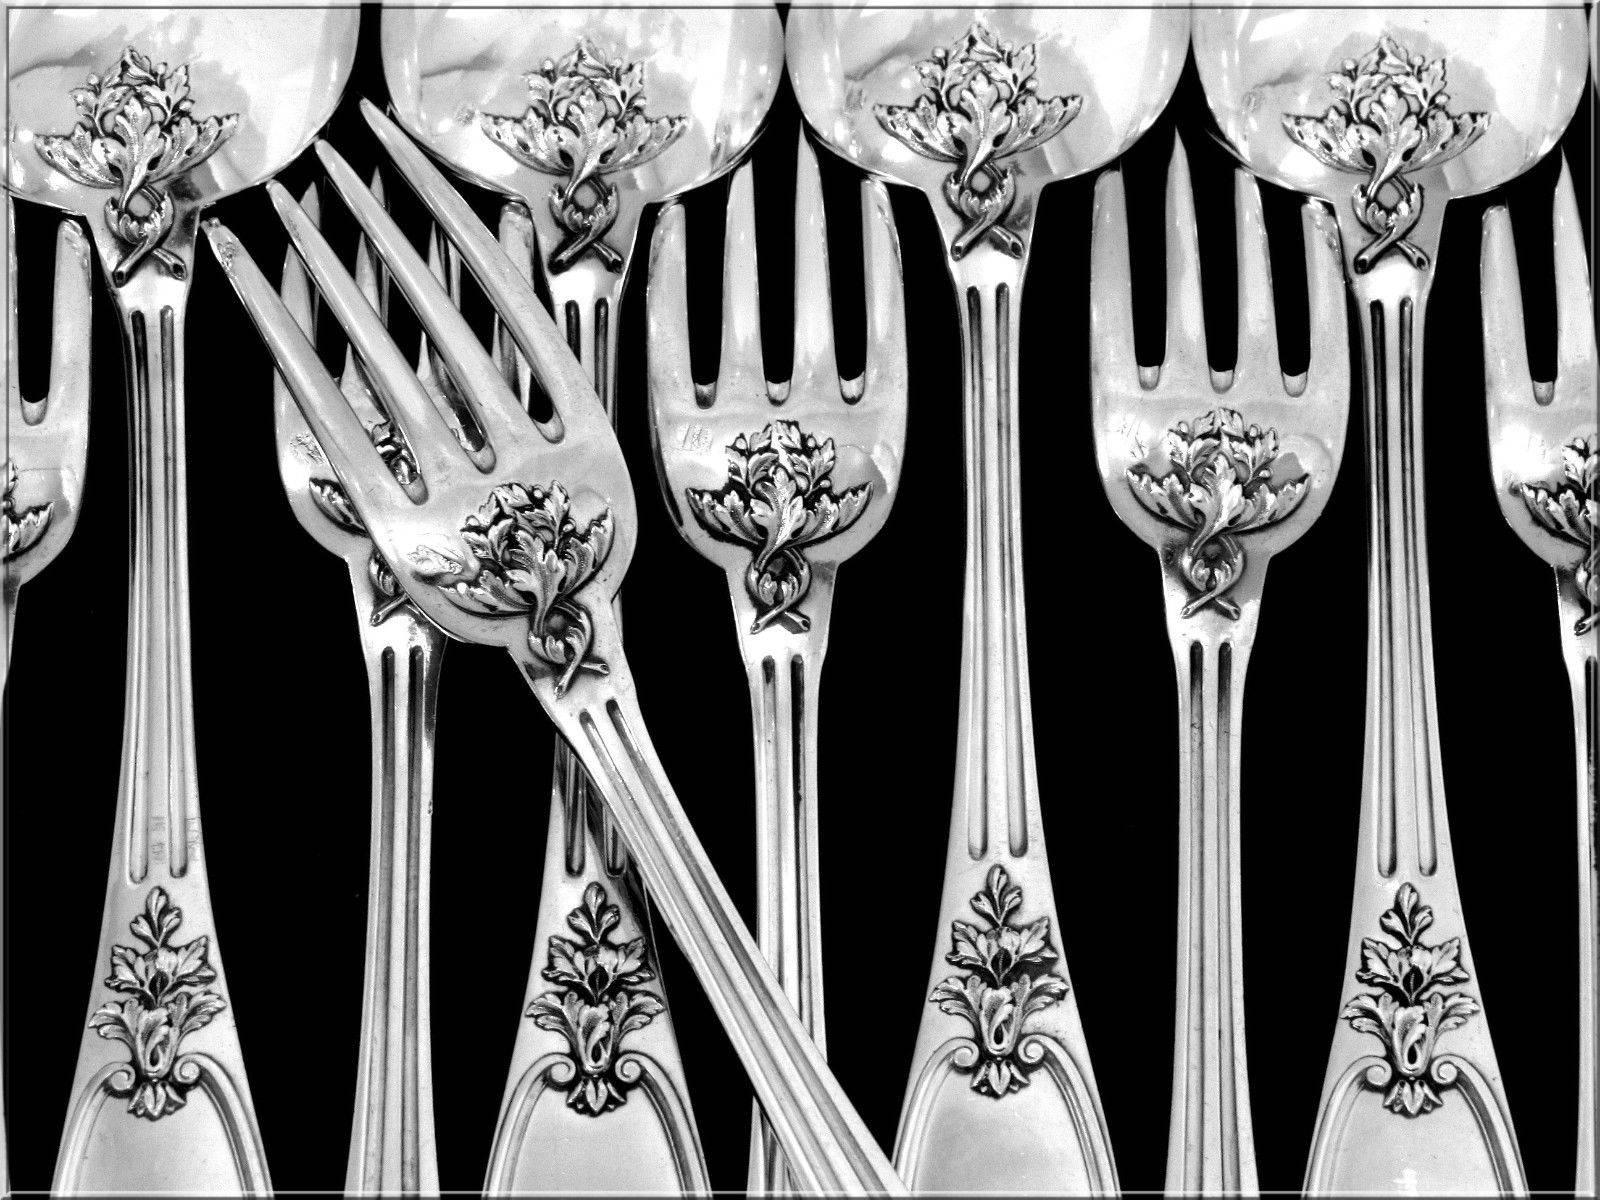 Henin French Sterling Silver Dinner Flatware Set of 12 Pieces, Neoclassical 3